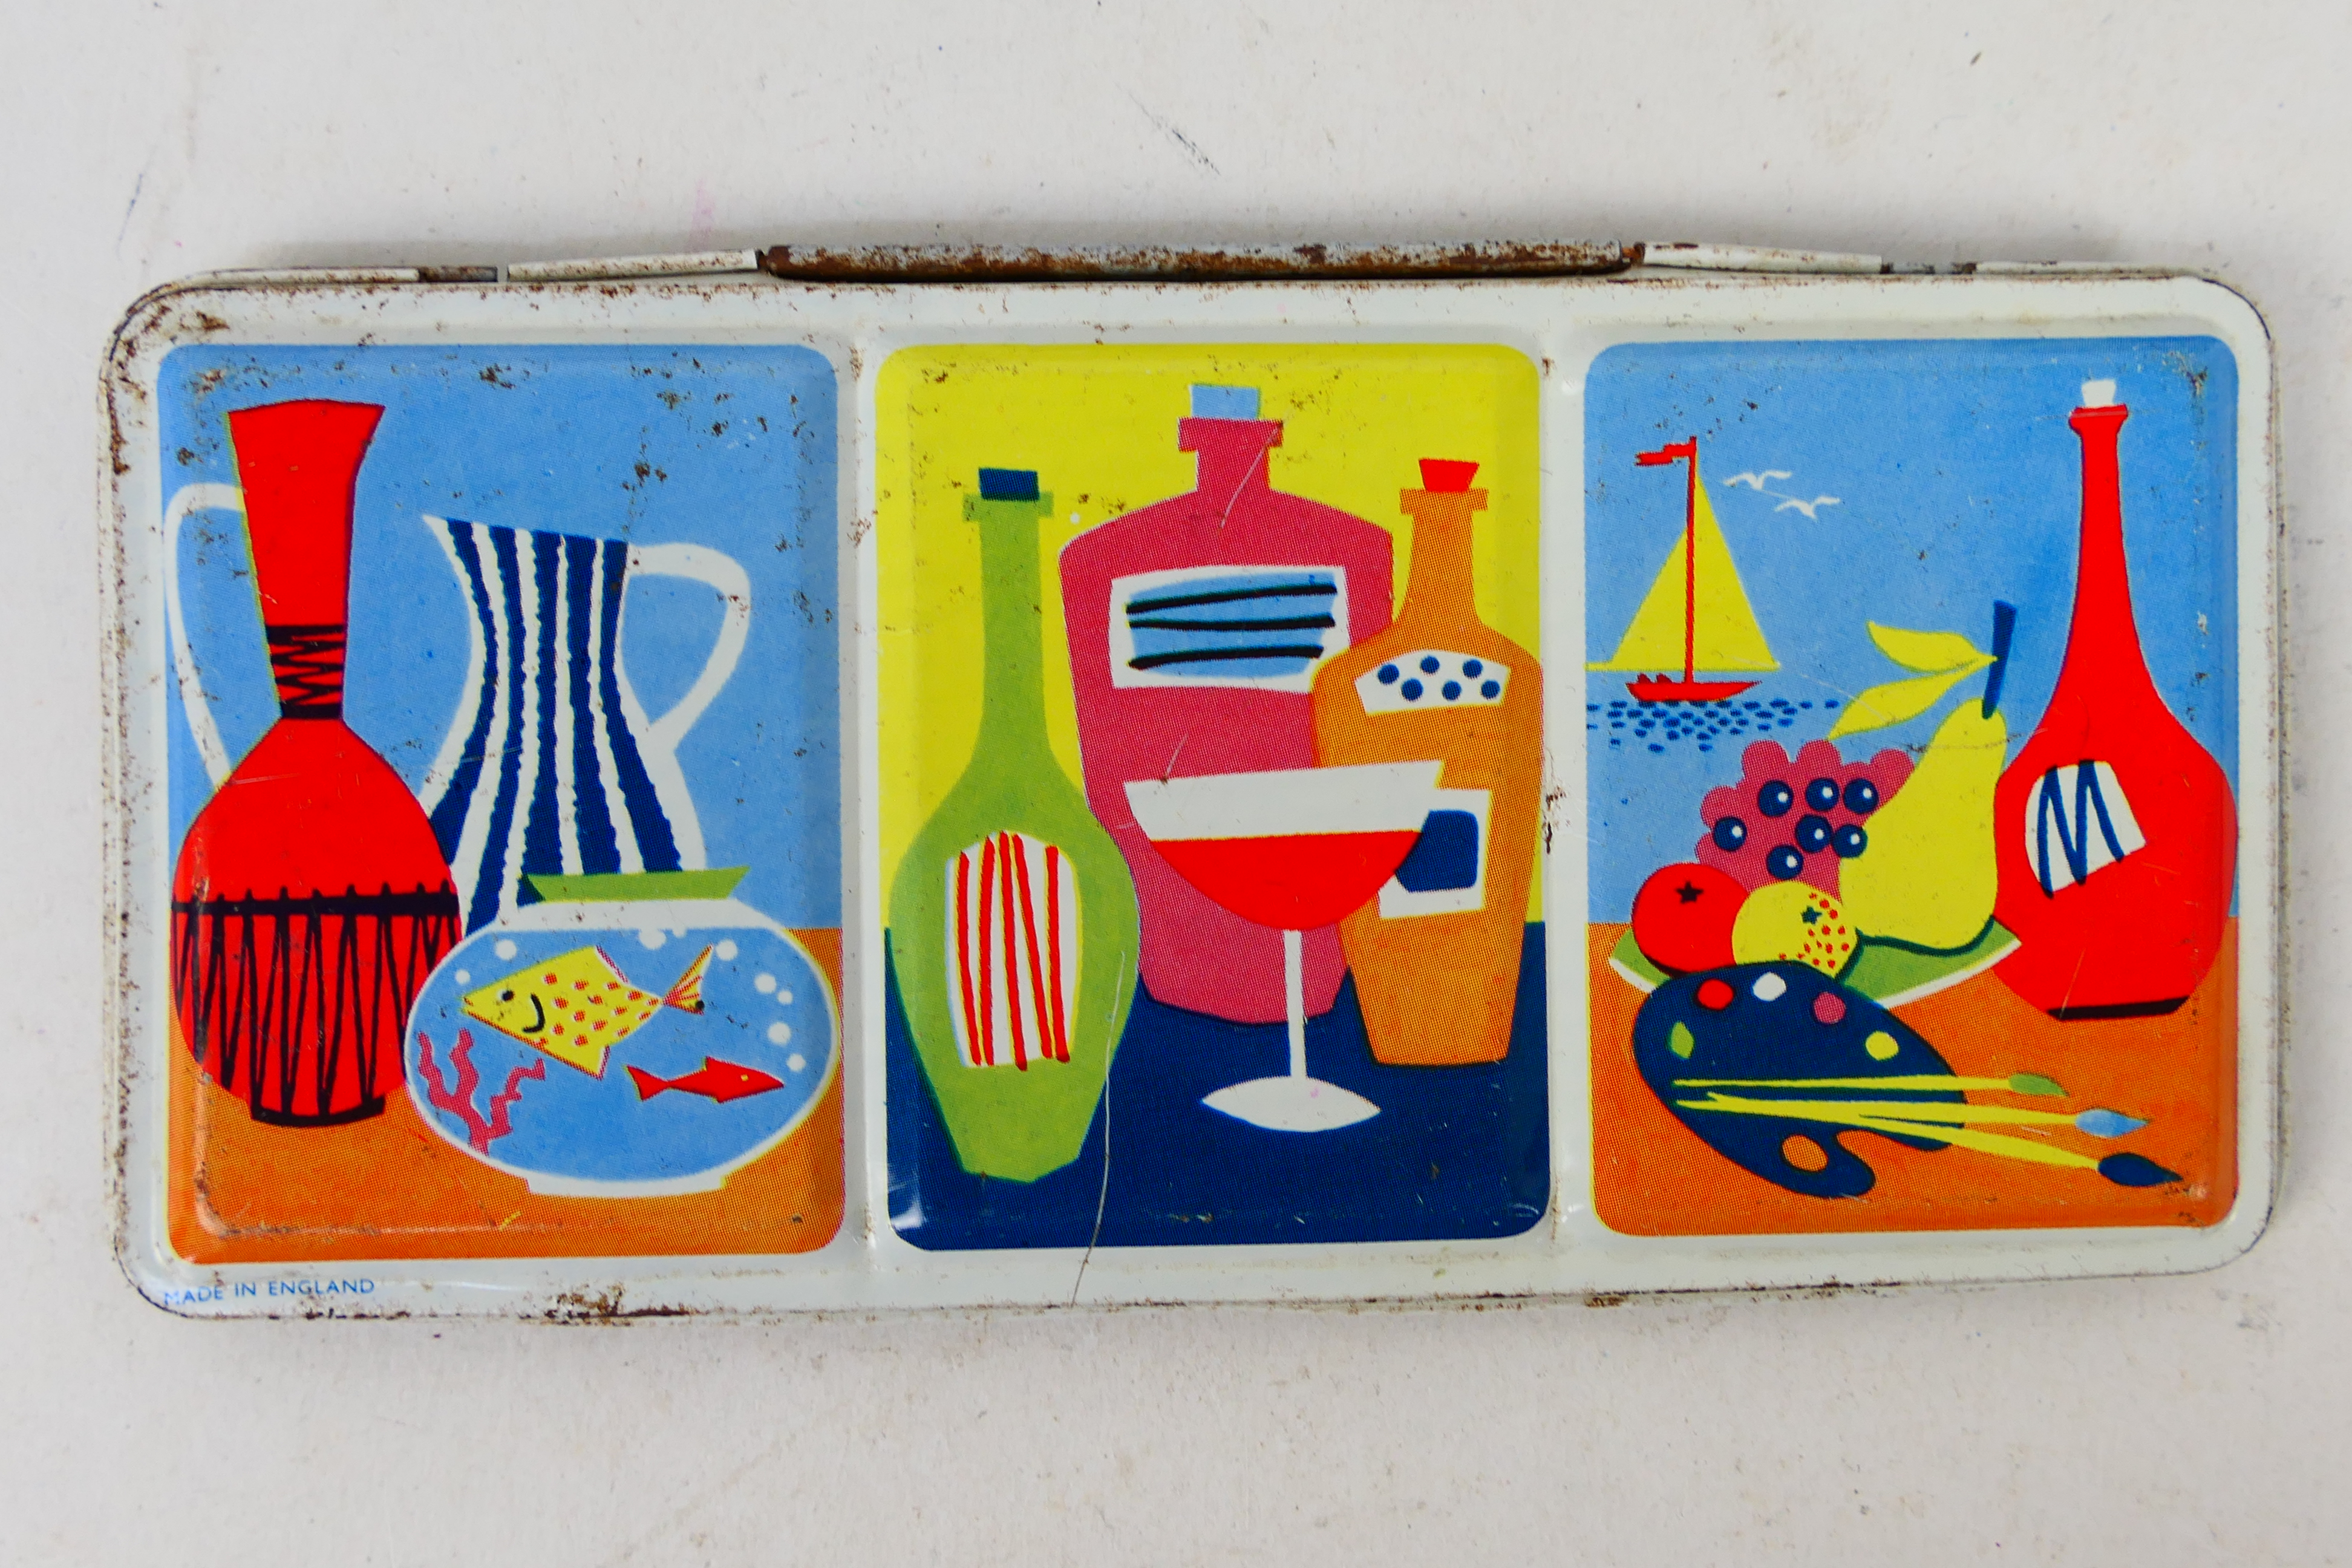 LL Product London - Vintage Paint Tins / Pallets. - Image 12 of 13